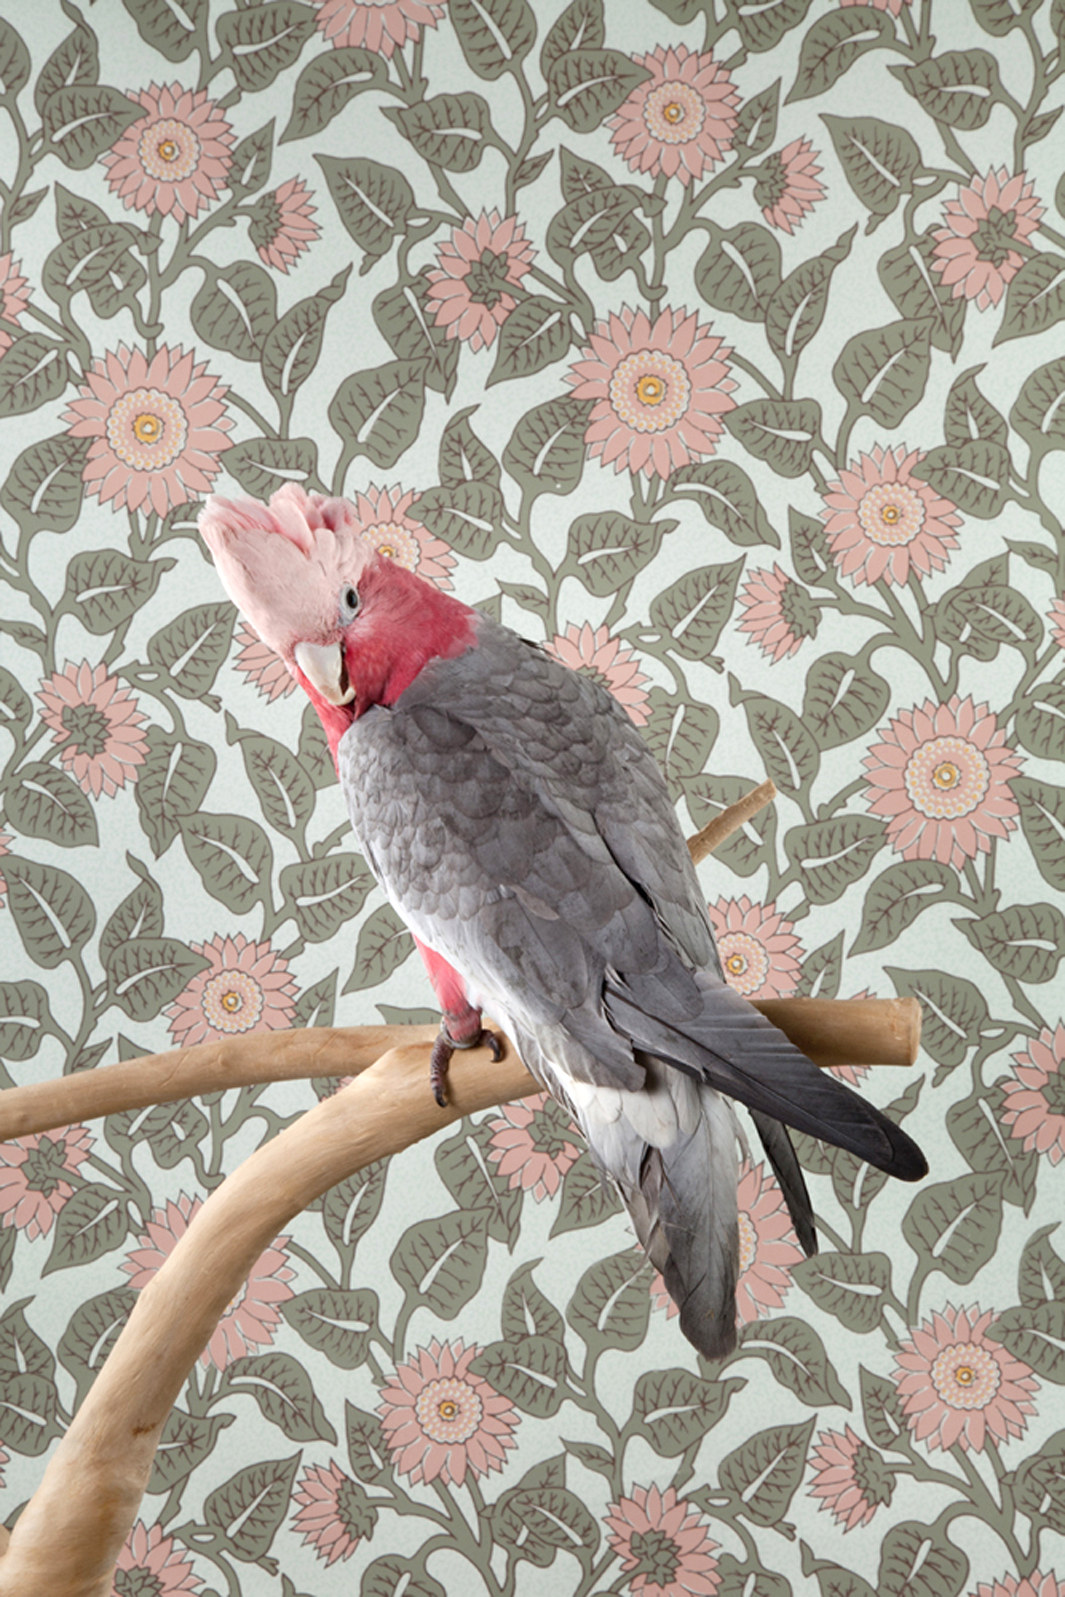 Claire Rosen | Rose Breasted Cockatoo in front of a Vintage Wallpaper